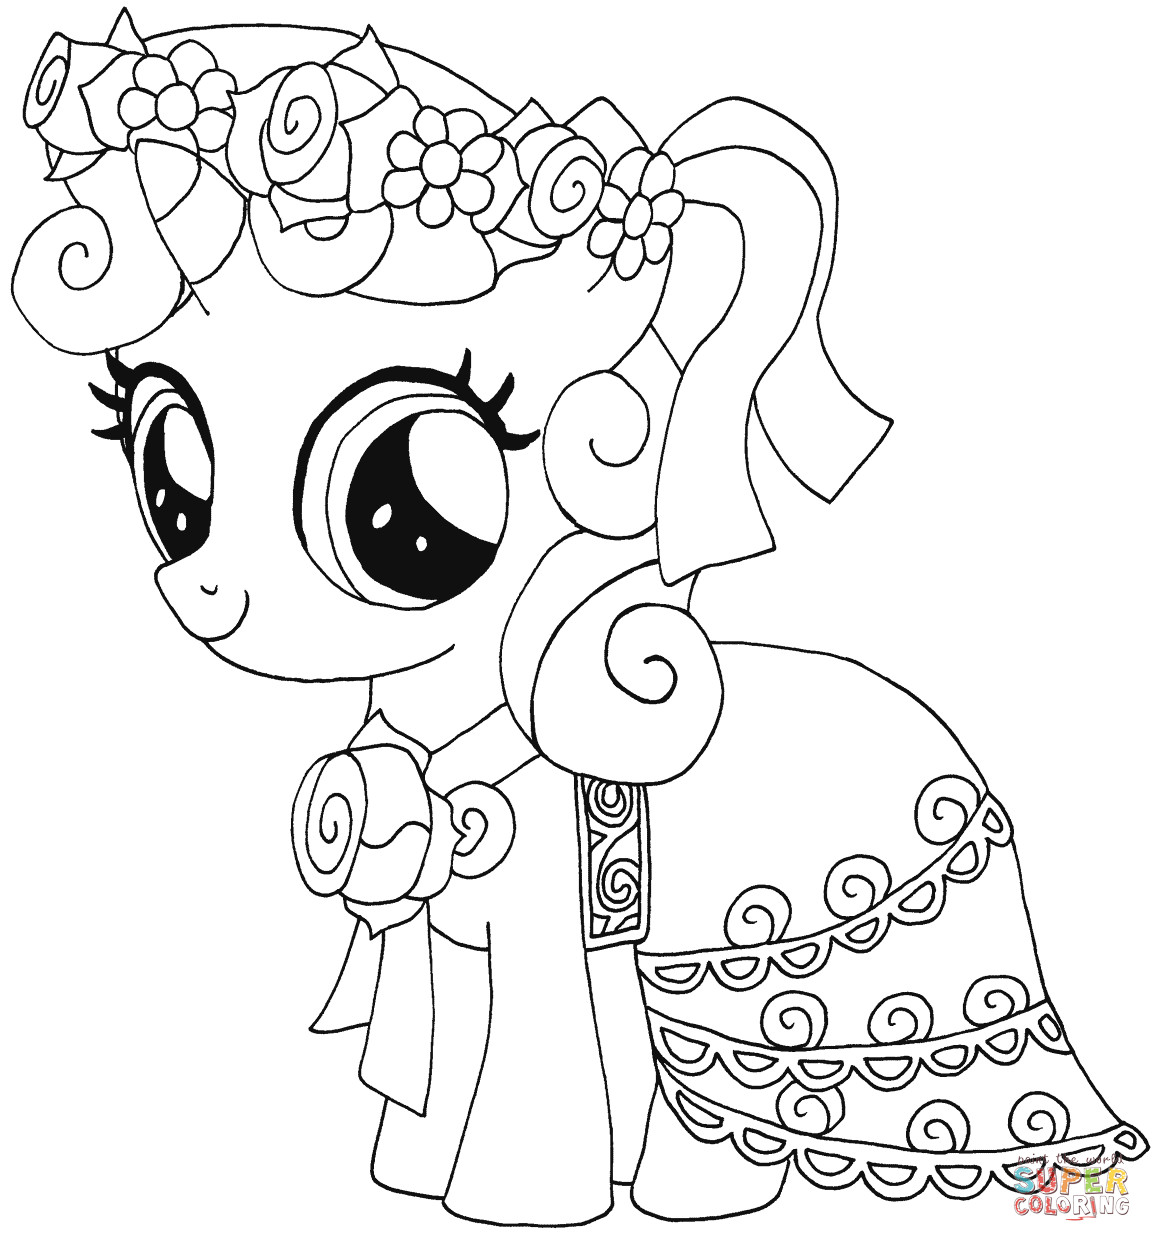 Coloring Pages Of My Little Pony
 My Little Pony Sweetie Belle coloring page